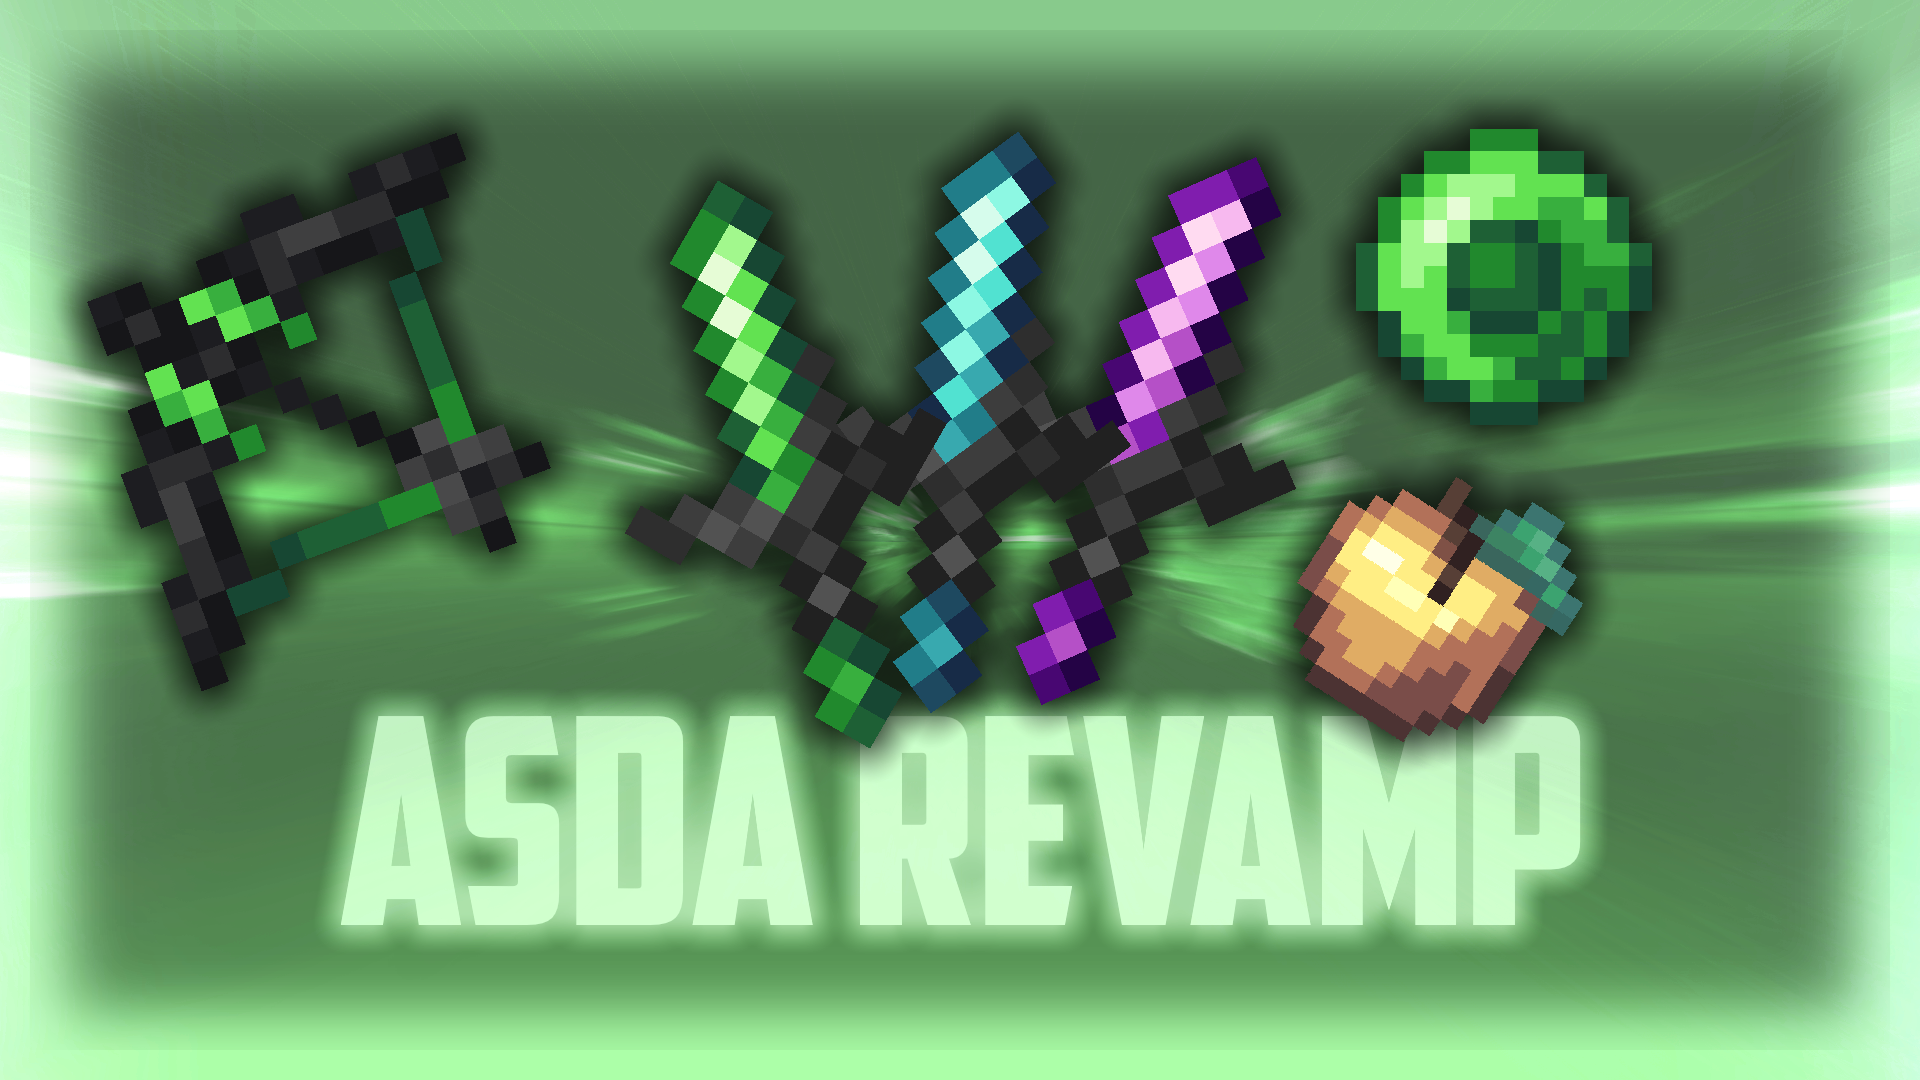 Asda Revamp - Purple recolor 16 by Zlax on PvPRP